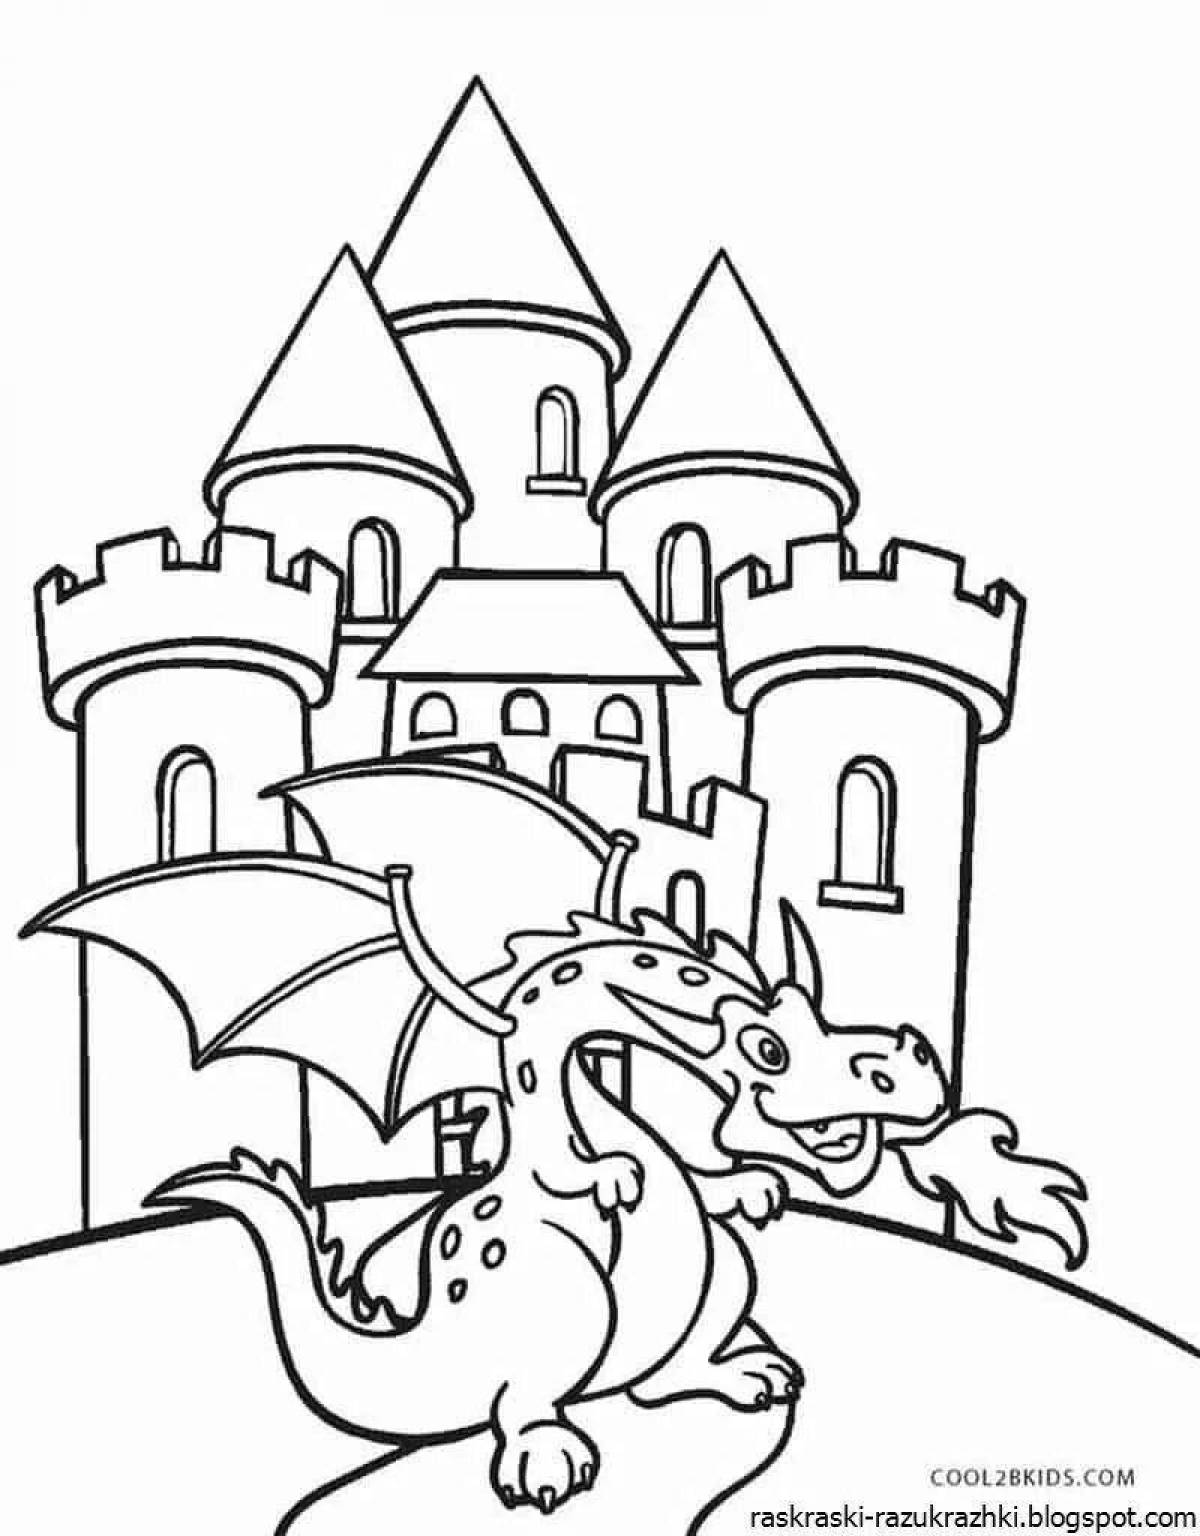 Rampant castle coloring book for 6-7 year olds